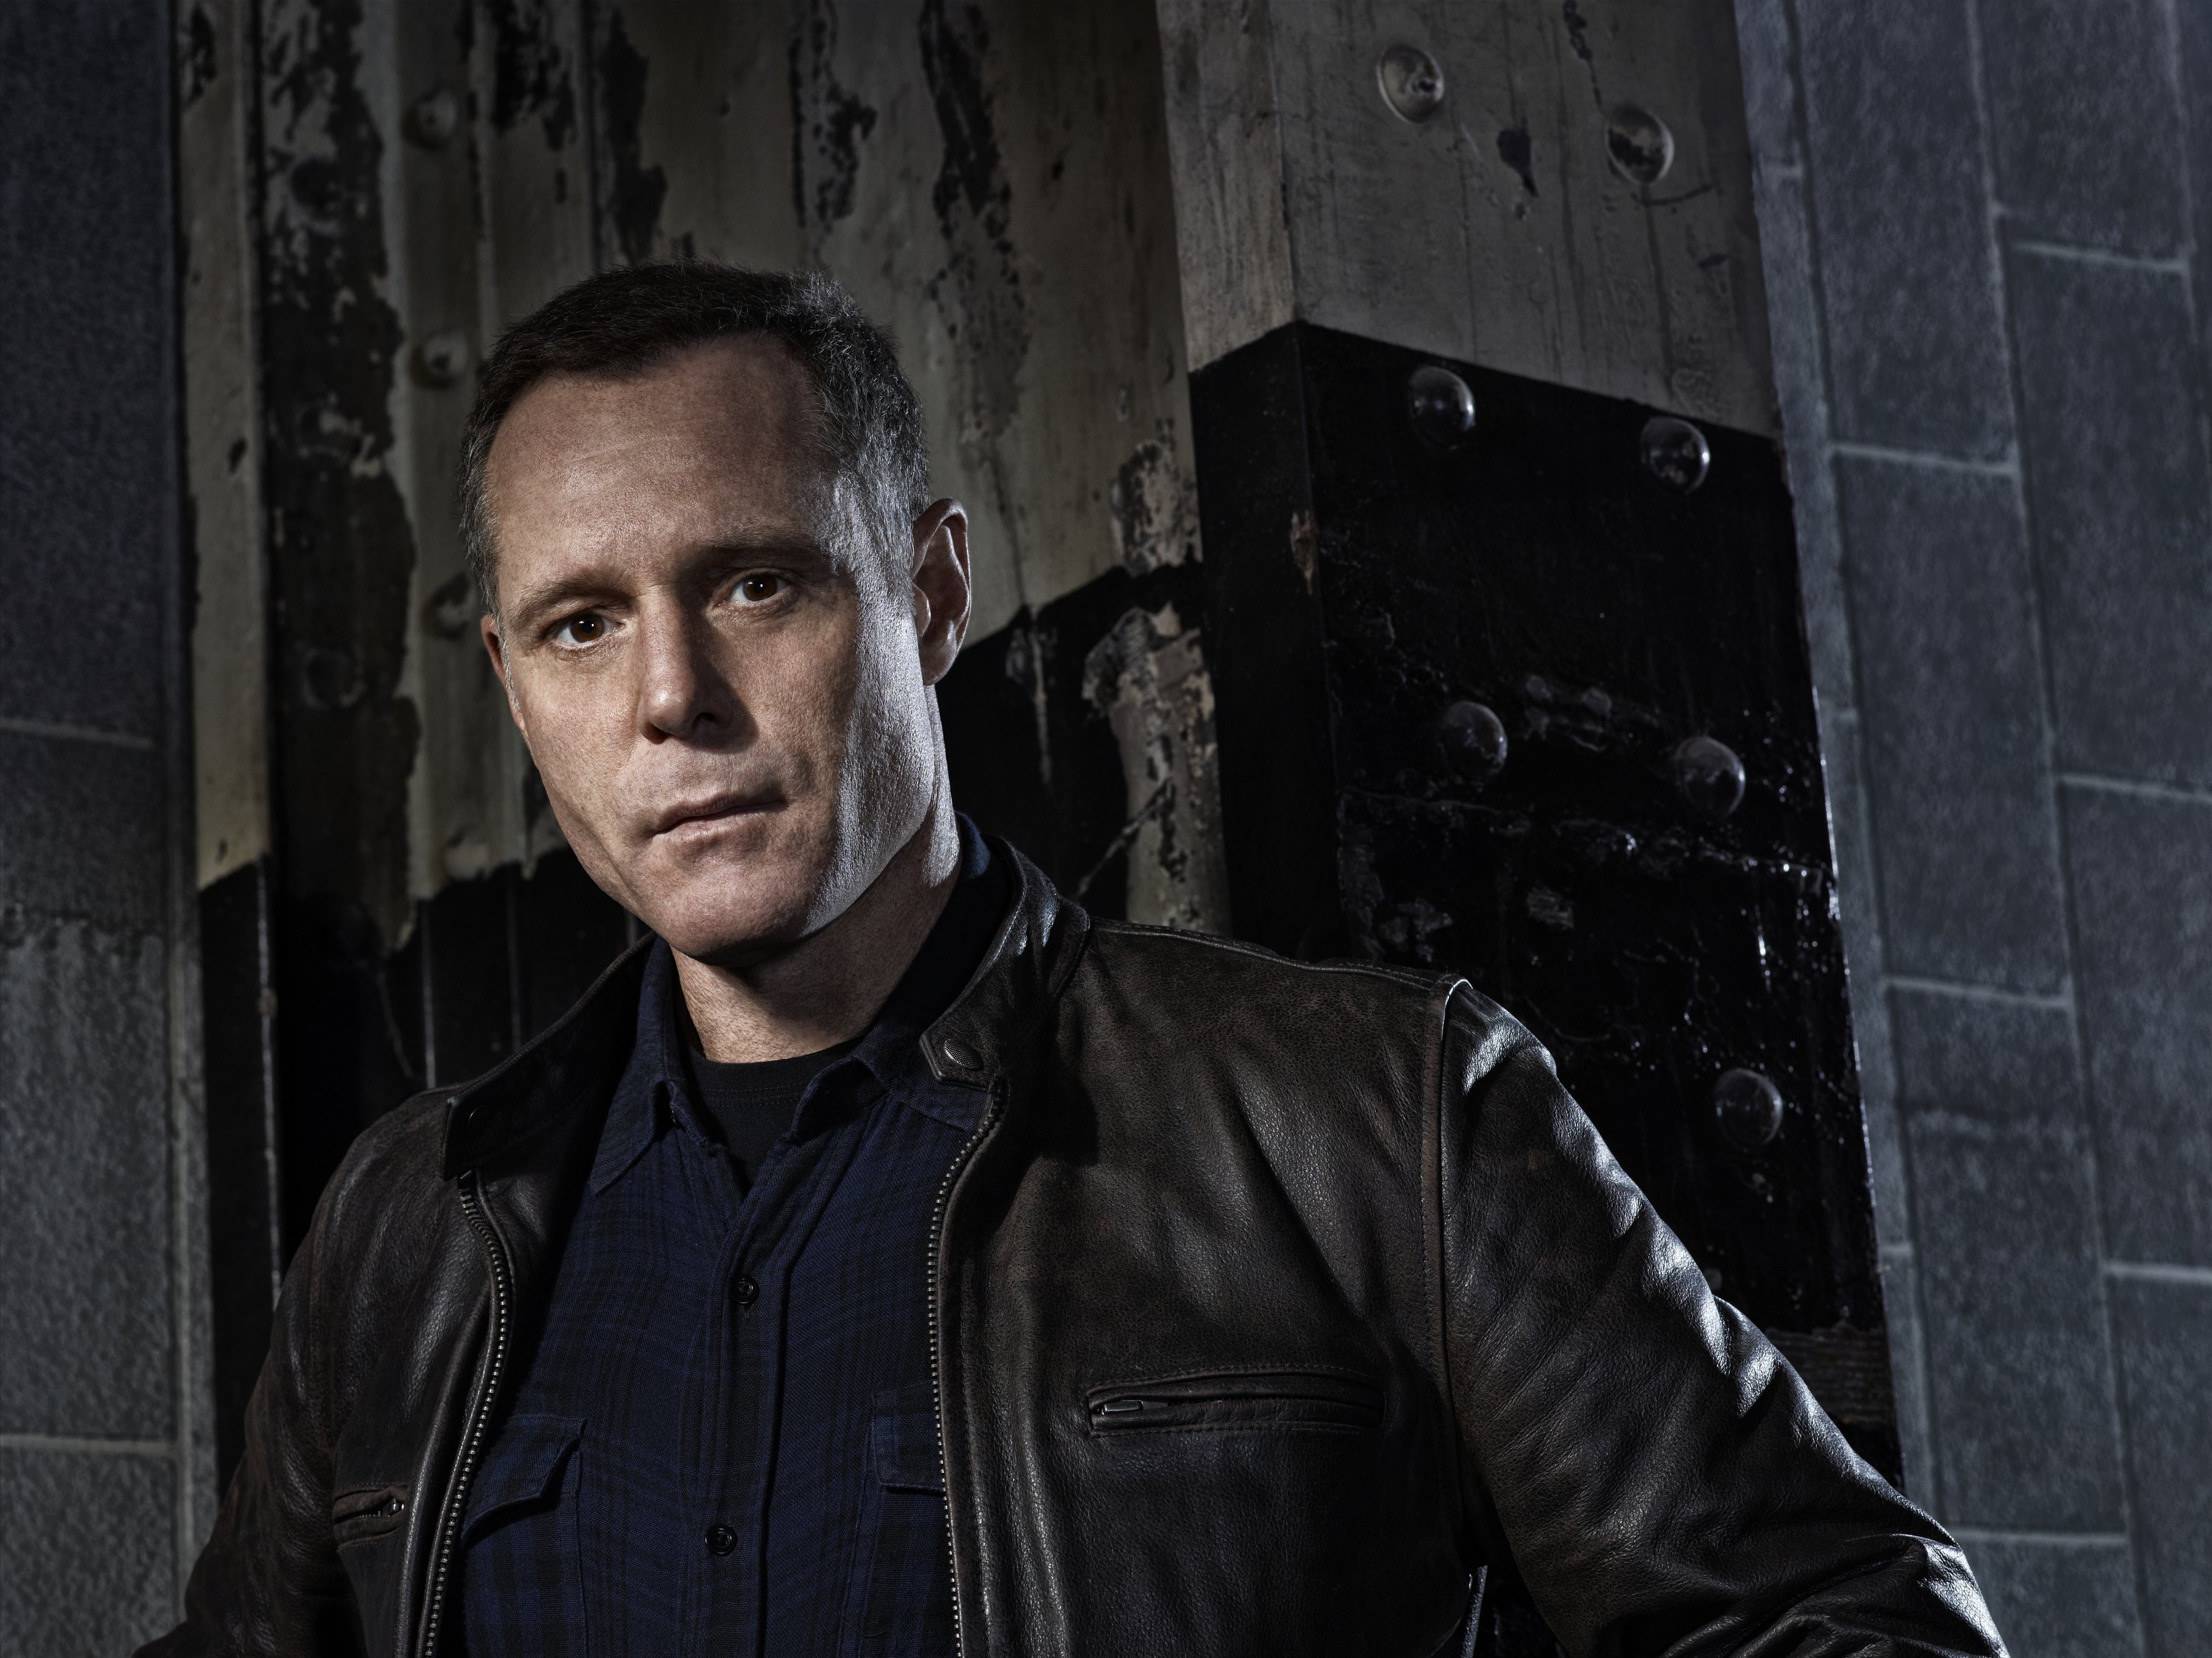 Jason Beghe in season 1 of "Chicago PD" on December 5, 2013 | Source: Getty Images